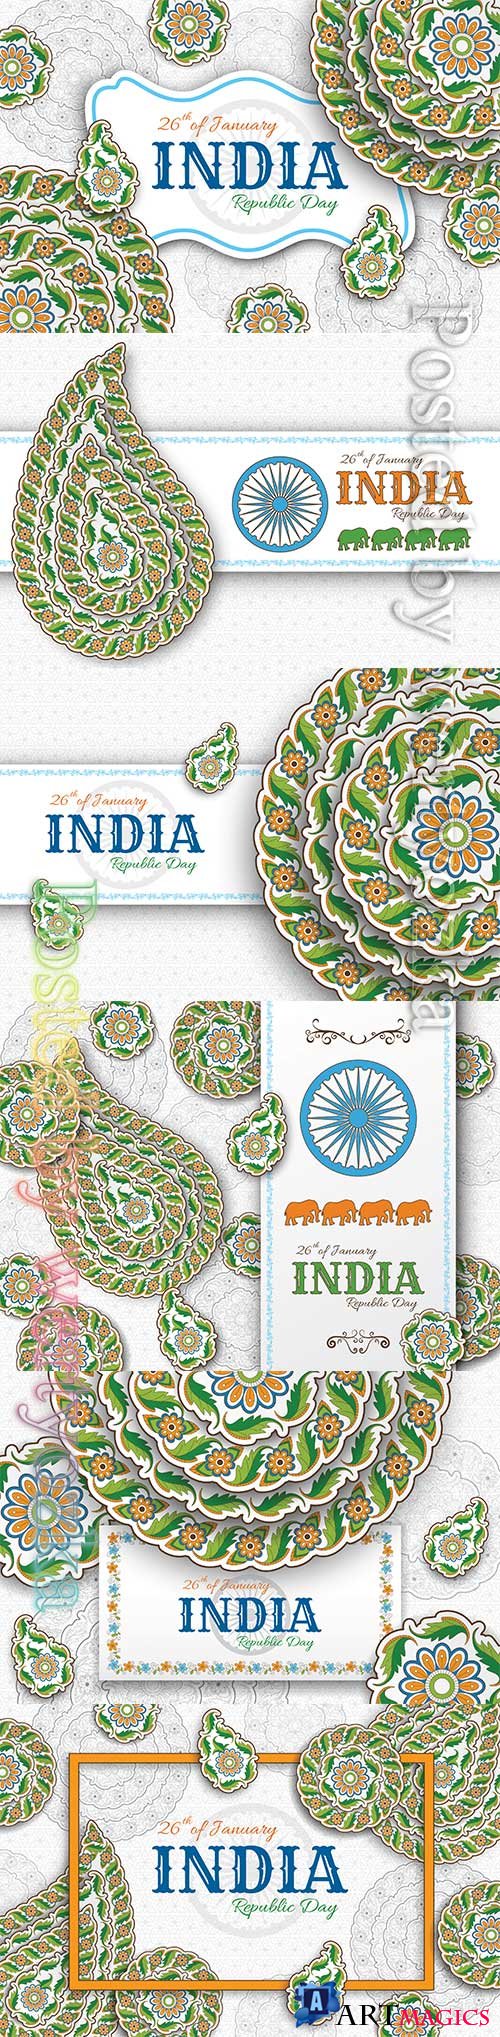 Indian Republic Day background with paisley and mandala